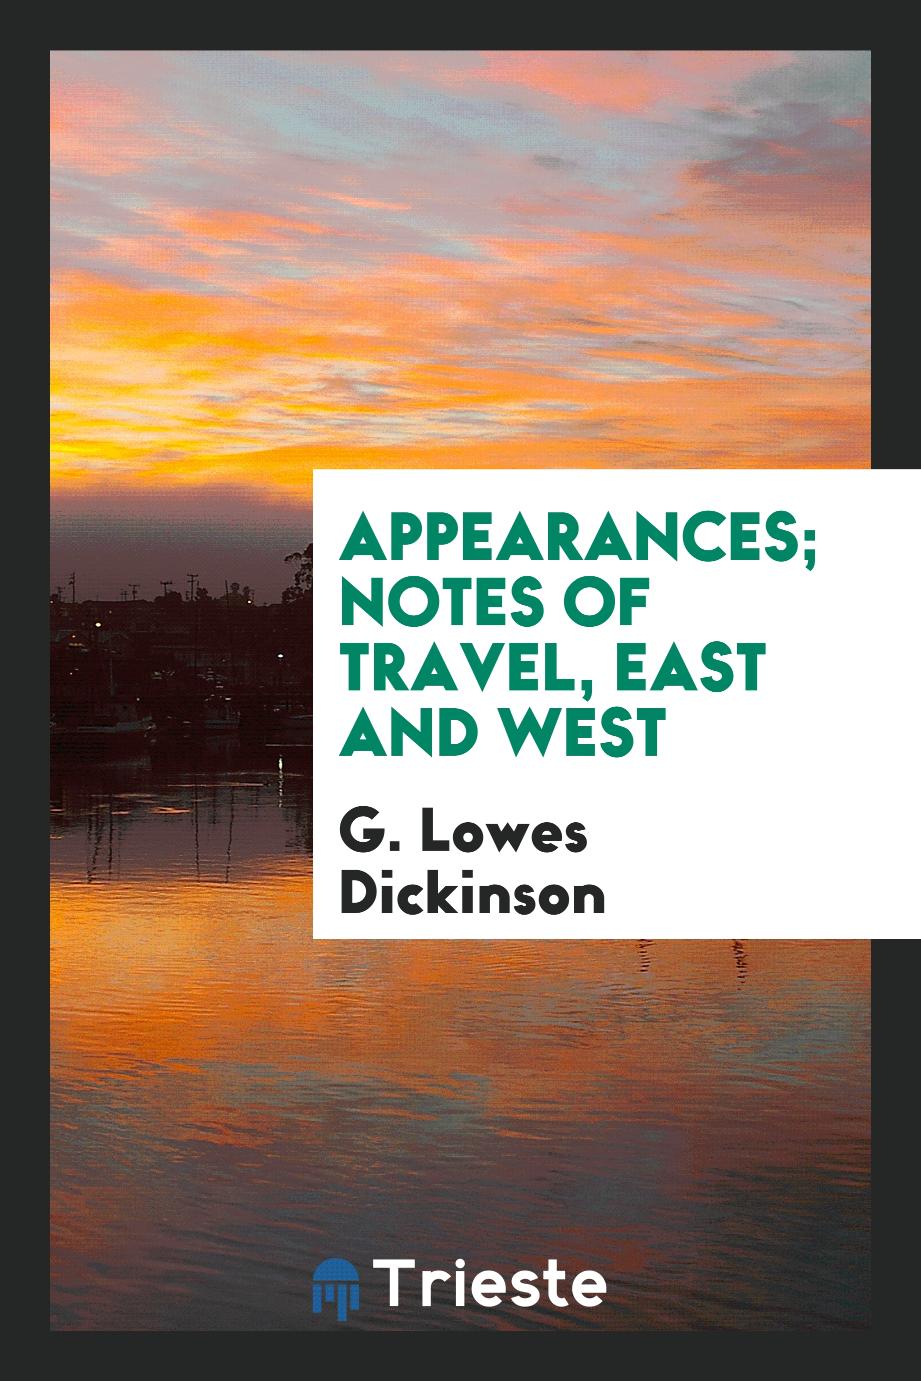 G. Lowes Dickinson - Appearances; Notes of travel, East and West